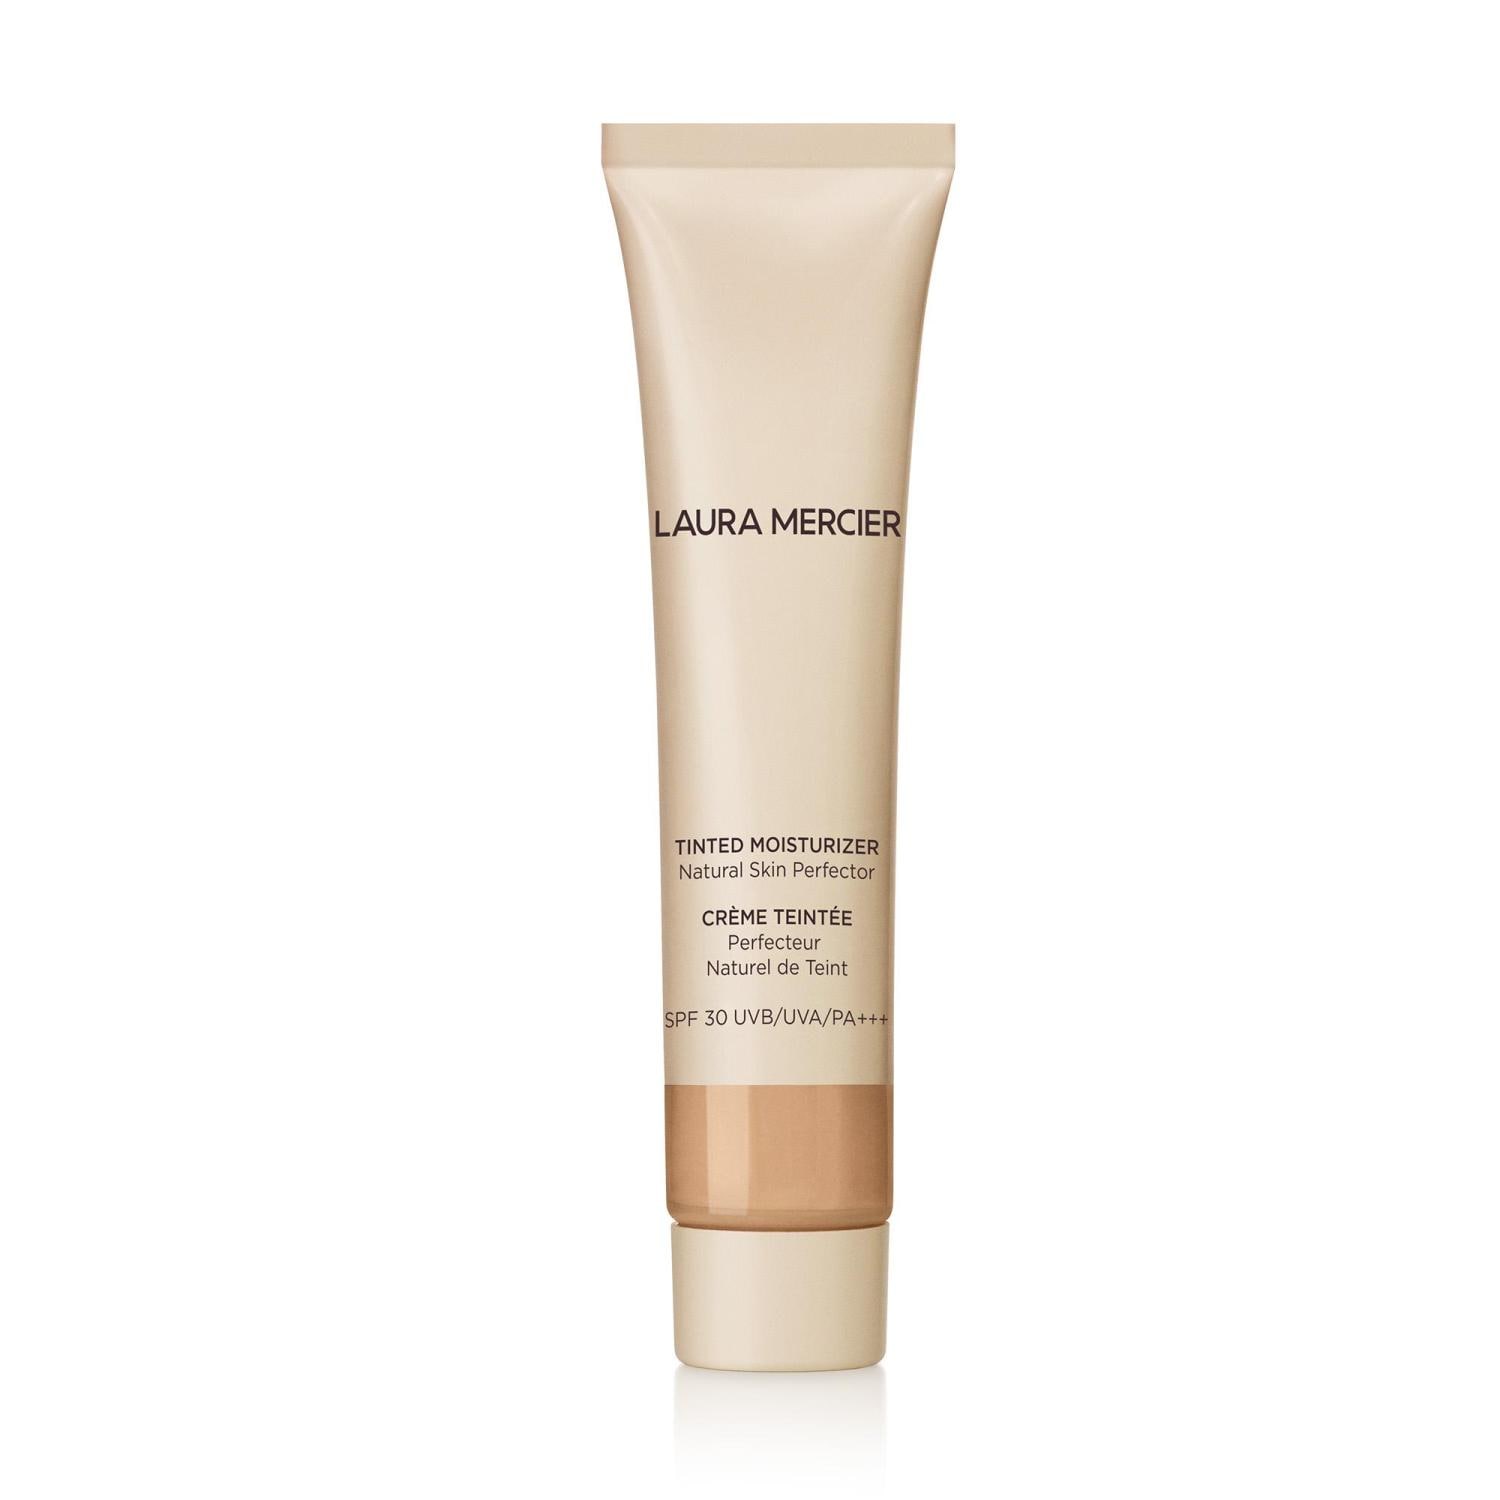 Laura Mercier Beauty To Go Travel Size - Tinted Moisturizer Natural Skin Perfector SPF 30, No. 3C1 - FAWN